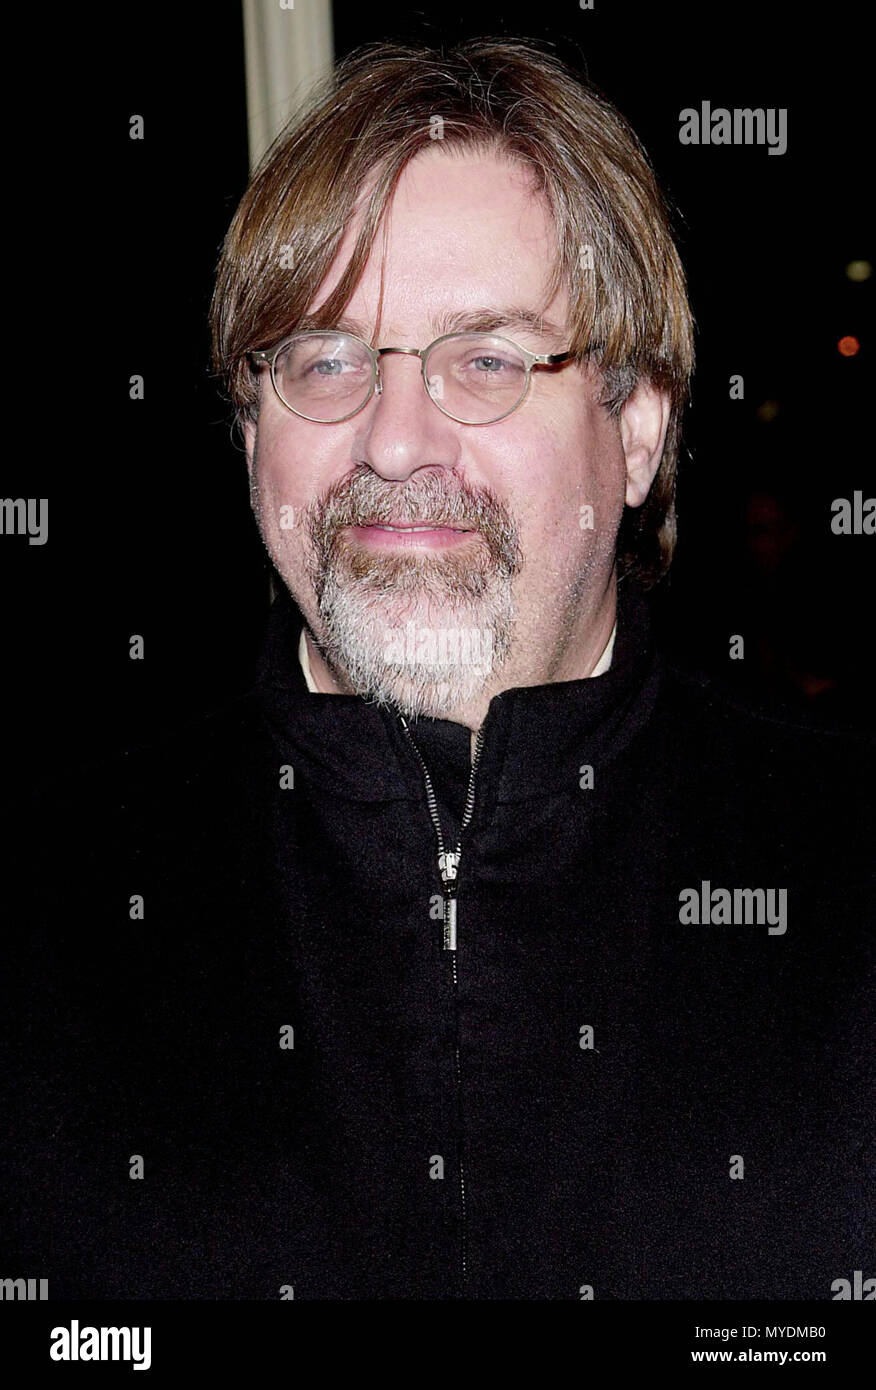 10 Oct 2000, Los Angeles, California, USA --- Matt Groening at 'The Ladies Man' premiere. 10.10.00-Los Angeles, CA --- Image by © . / USAMatt Groening Red Carpet Event, Vertical, USA, Film Industry, Celebrities,  Photography, Bestof, Arts Culture and Entertainment, Topix Celebrities fashion /  Vertical, Best of, Event in Hollywood Life - California,  Red Carpet and backstage, USA, Film Industry, Celebrities,  movie celebrities, TV celebrities, Music celebrities, Photography, Bestof, Arts Culture and Entertainment,  Topix,  vertical, one person, inquiry tsuni@Gamma-USA.com,   headshot, portrait Stock Photo